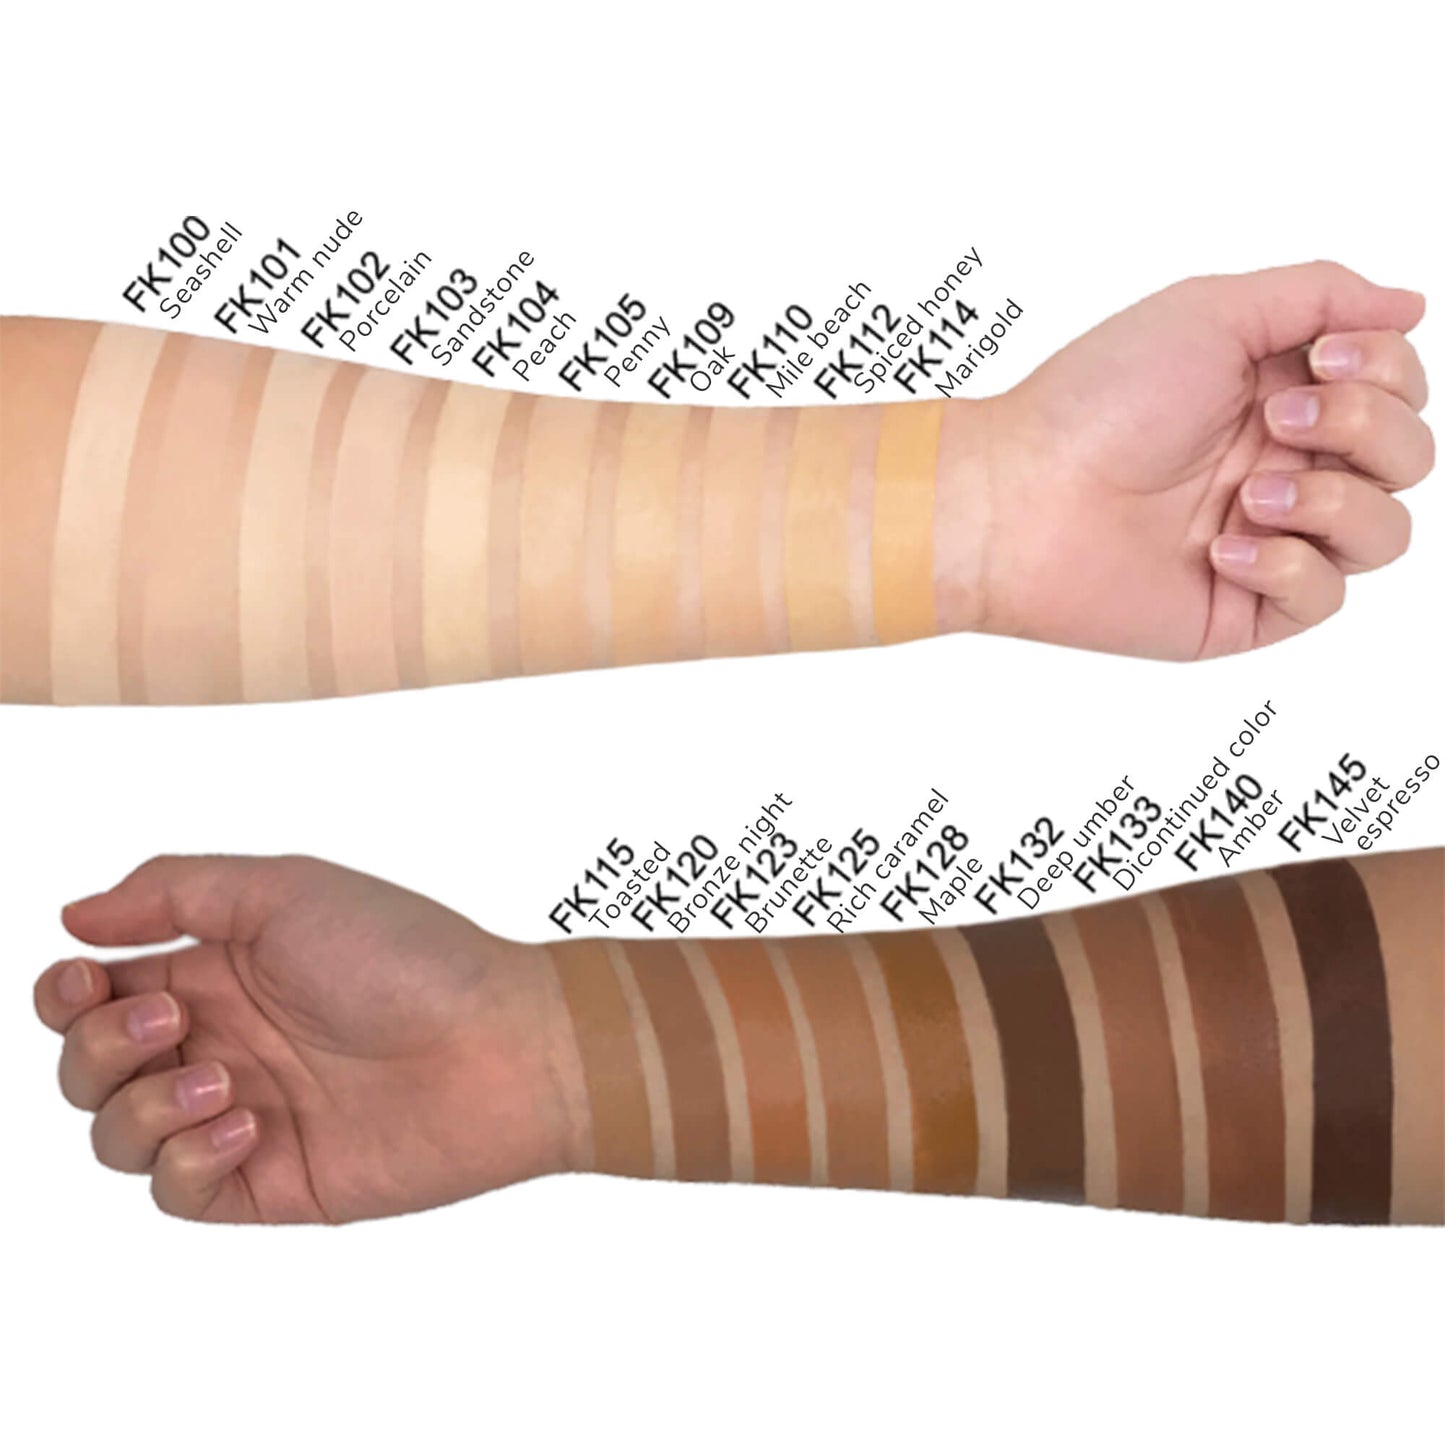 Get a glowing, healthy look with Peach Foundation. Breathable and SPF 15 protection. Benefits include seamless blending, buildable and lightweight coverage. 19 shades suitable for all skin types.